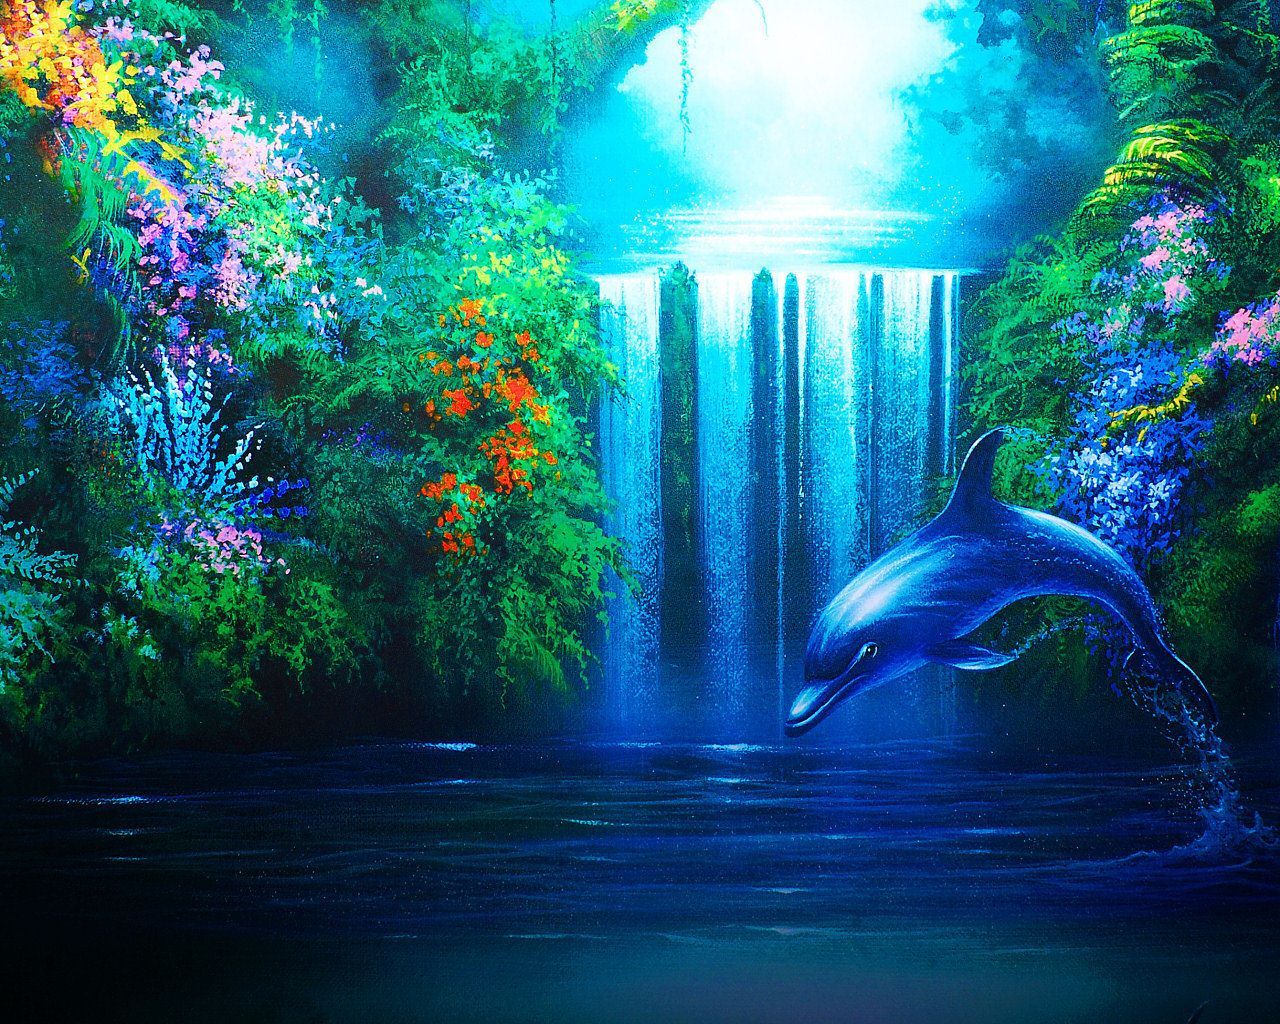 Dolphins Wallpaper: ♥ Dolphins ♥. Waterfall wallpaper, Dolphin image, Scenery wallpaper